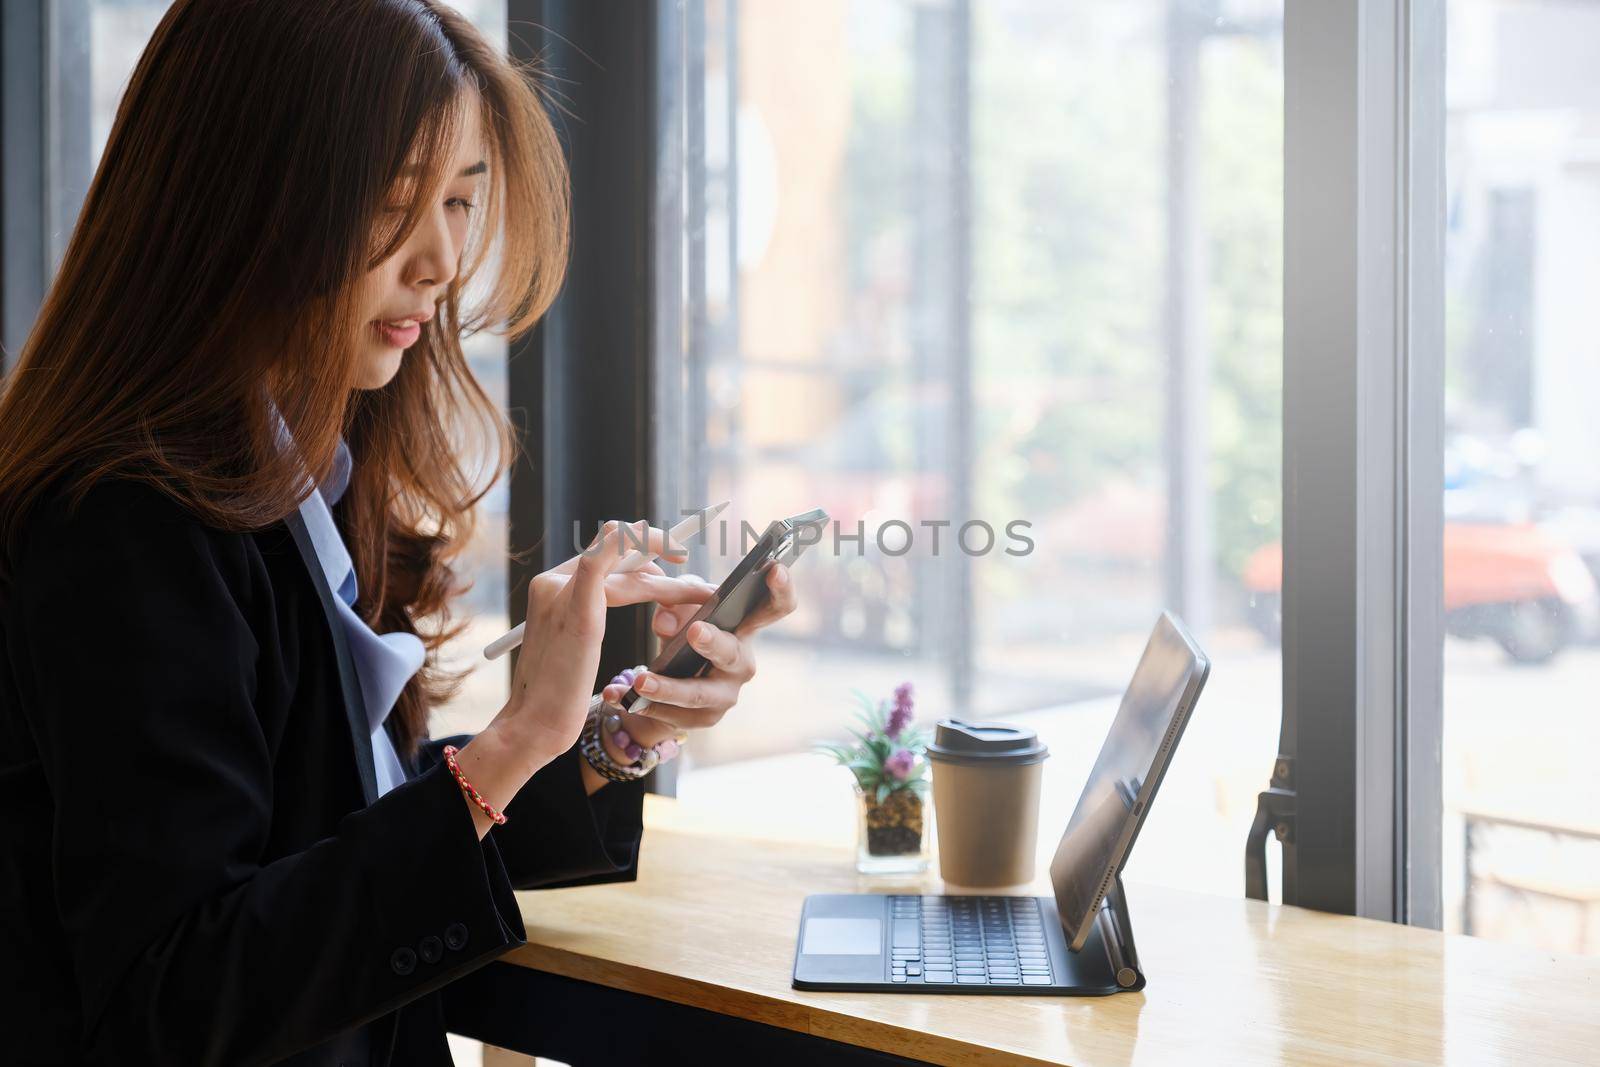 Closeup of Woman with a finger on the screen using a mobile phone in the office. Business woman hand using mobile smart phone and reading message via application